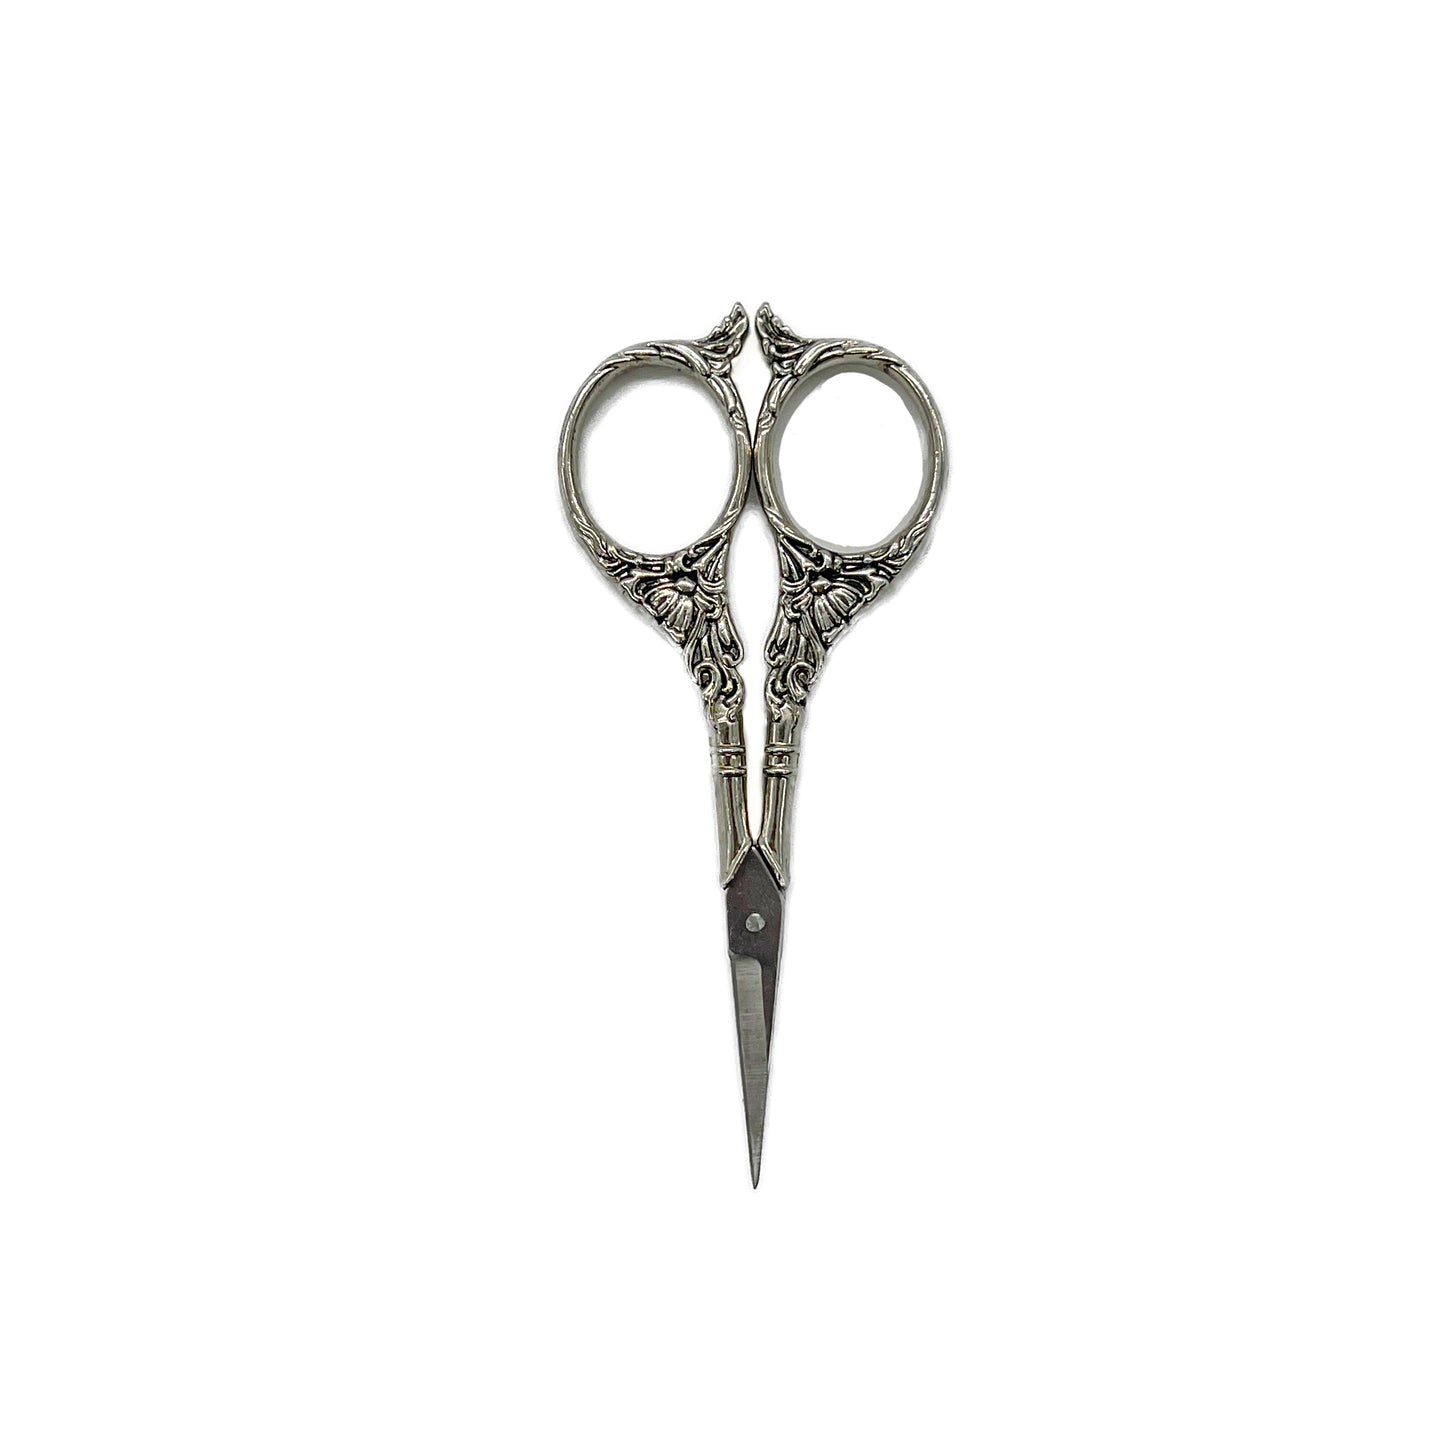 A Pair of Silver 4.5" crafting scissors on a white background.